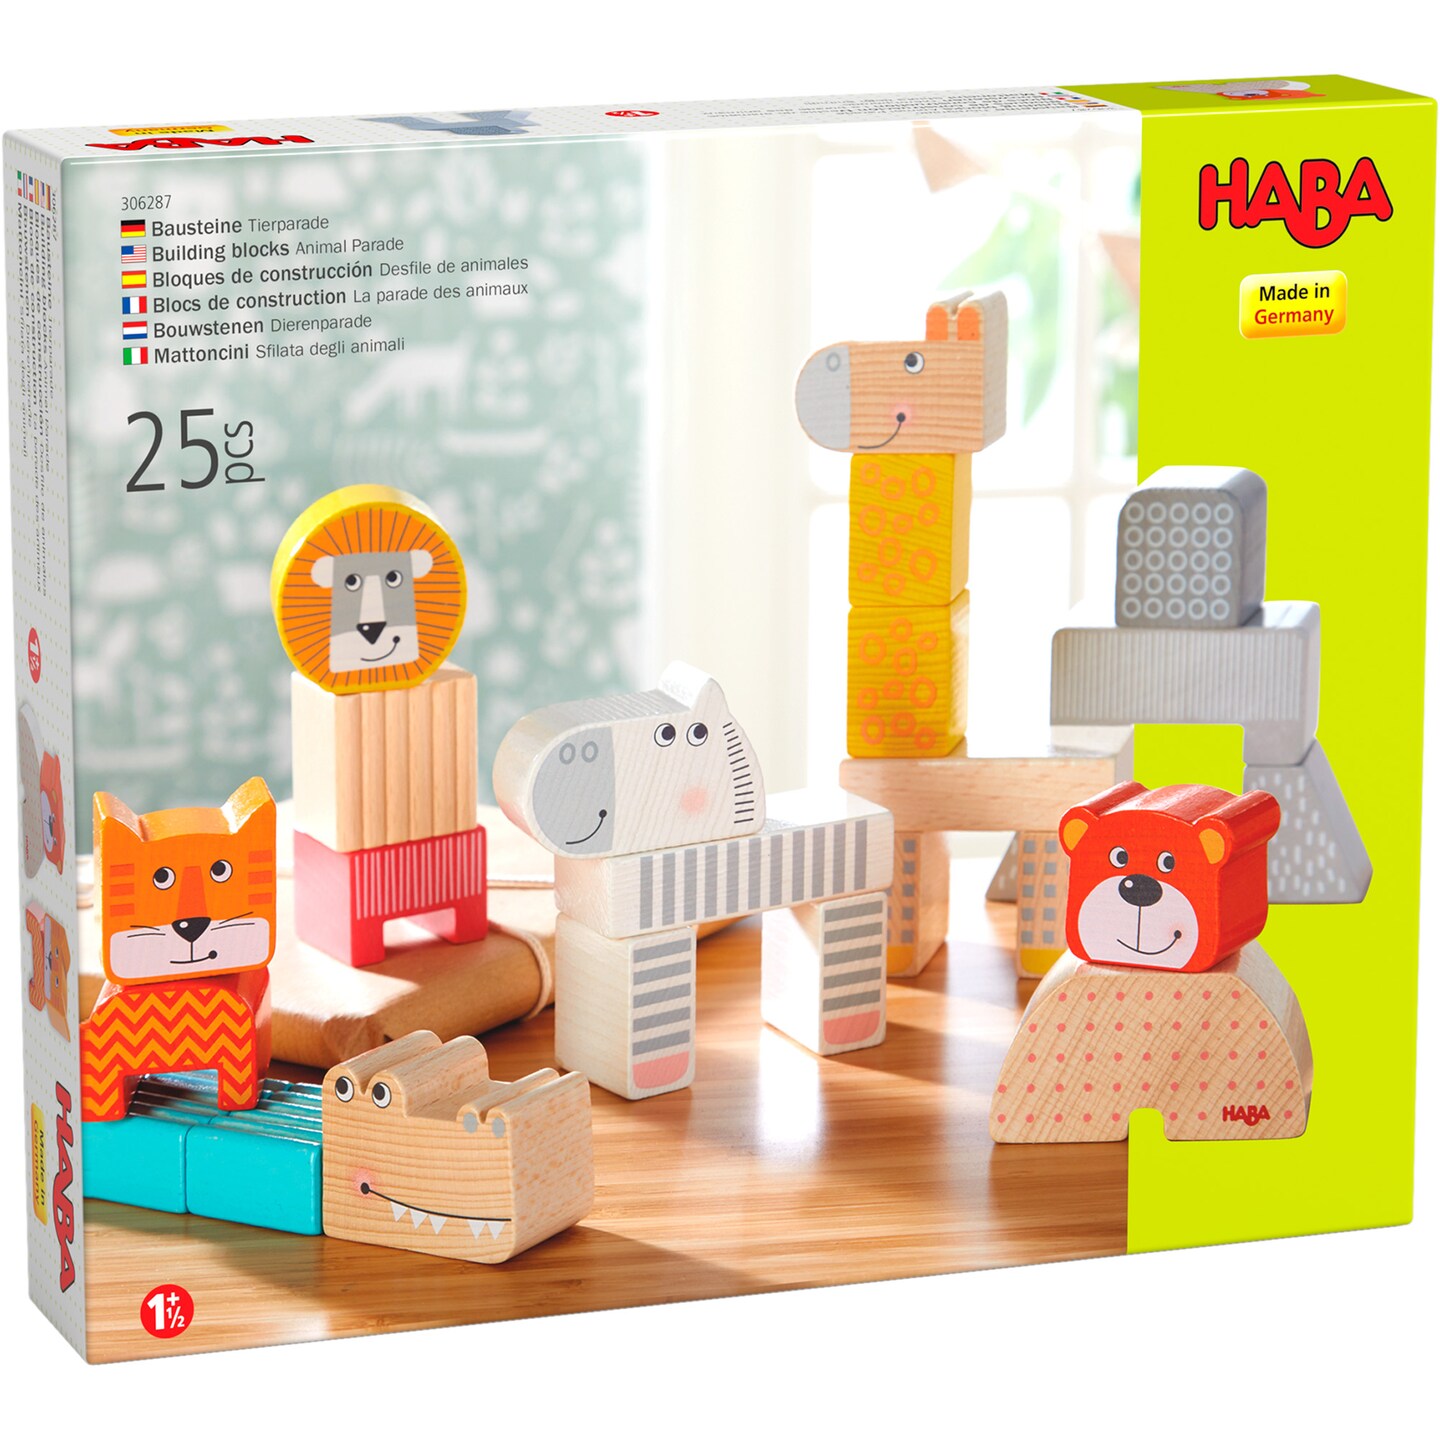 HABA Animal Parade Wooden Blocks - 25 Piece Set (Made in Germany)